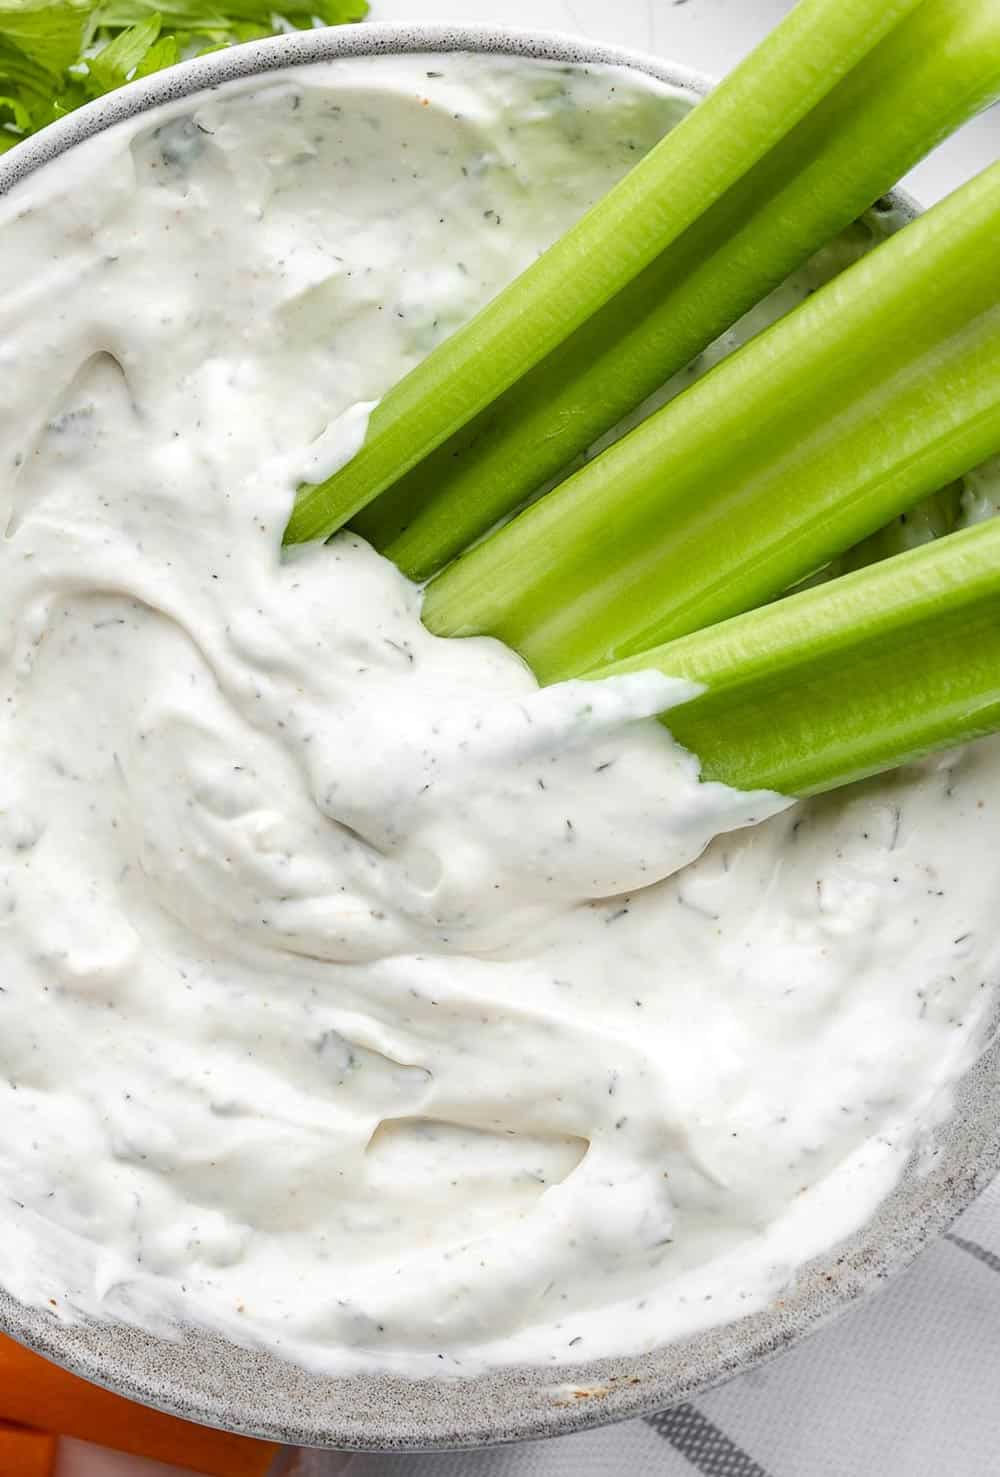 Texas Roadhouse Ranch dressing in a grey bowl with celery sticks on the side. The dressing is creamy and tangy, with specks of green herbs and spices visible. The celery sticks provide a colorful and crunchy contrast to the dressing.